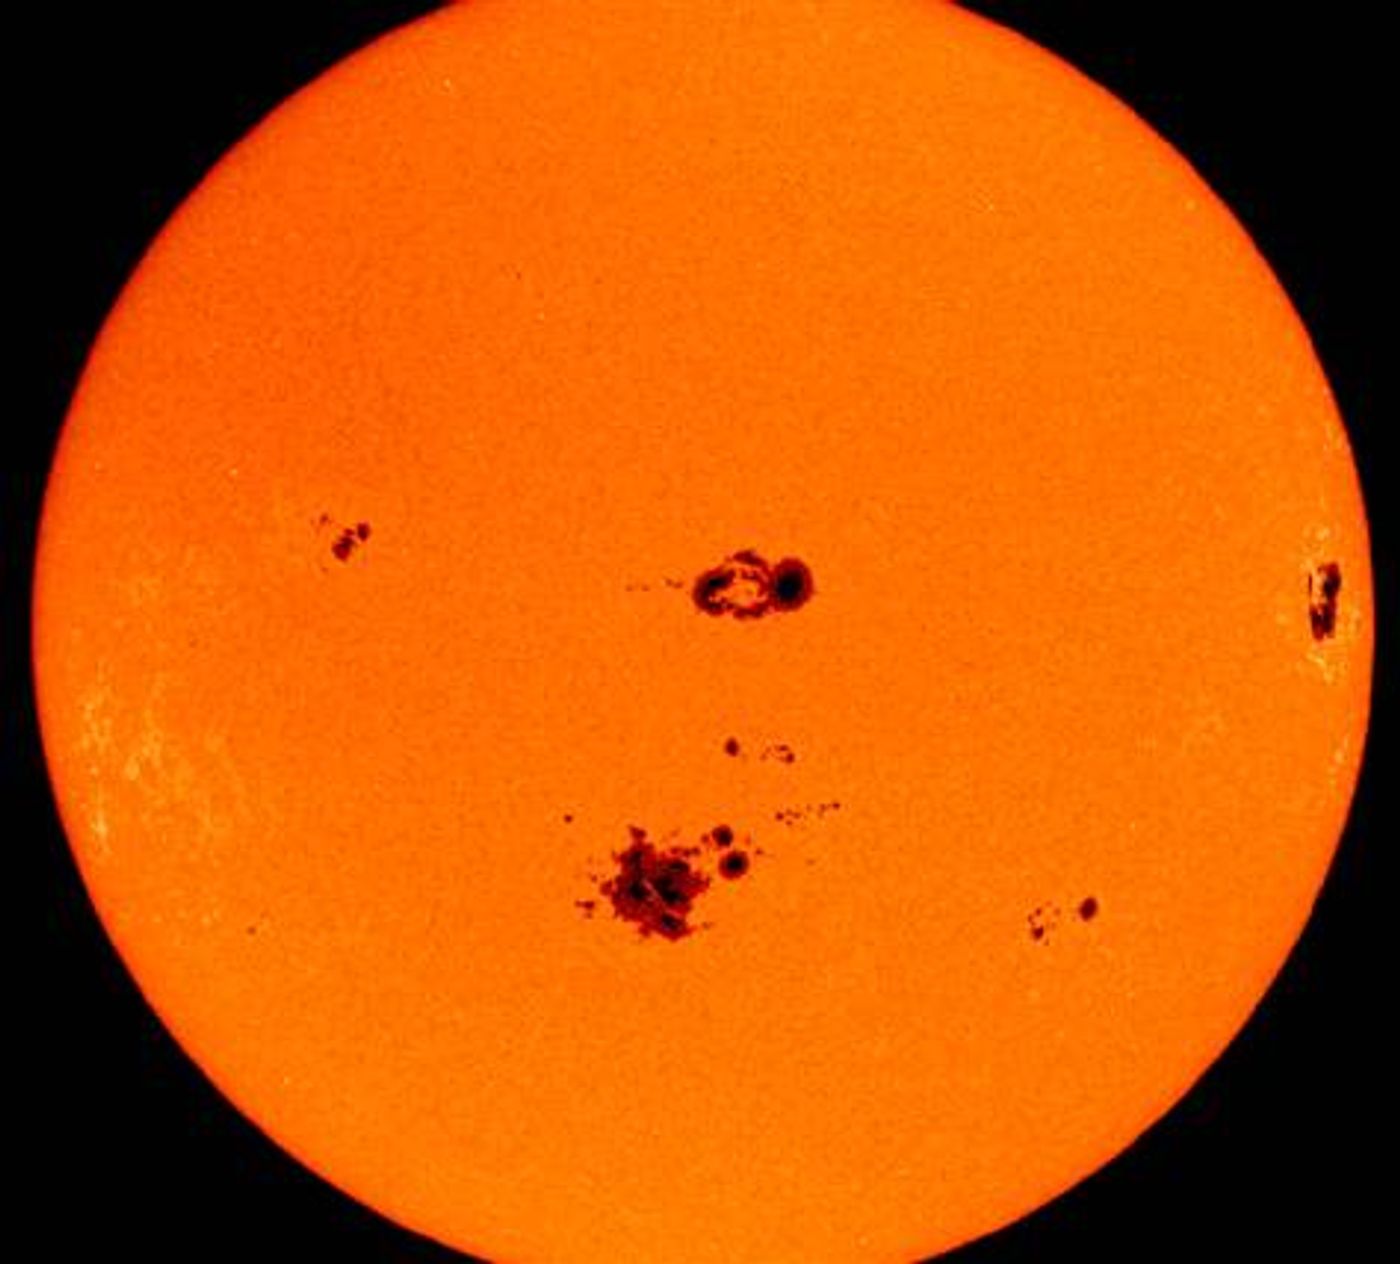 Observing sunspots helps scientists to determine patterns in solar events. Photo: National Weather Service